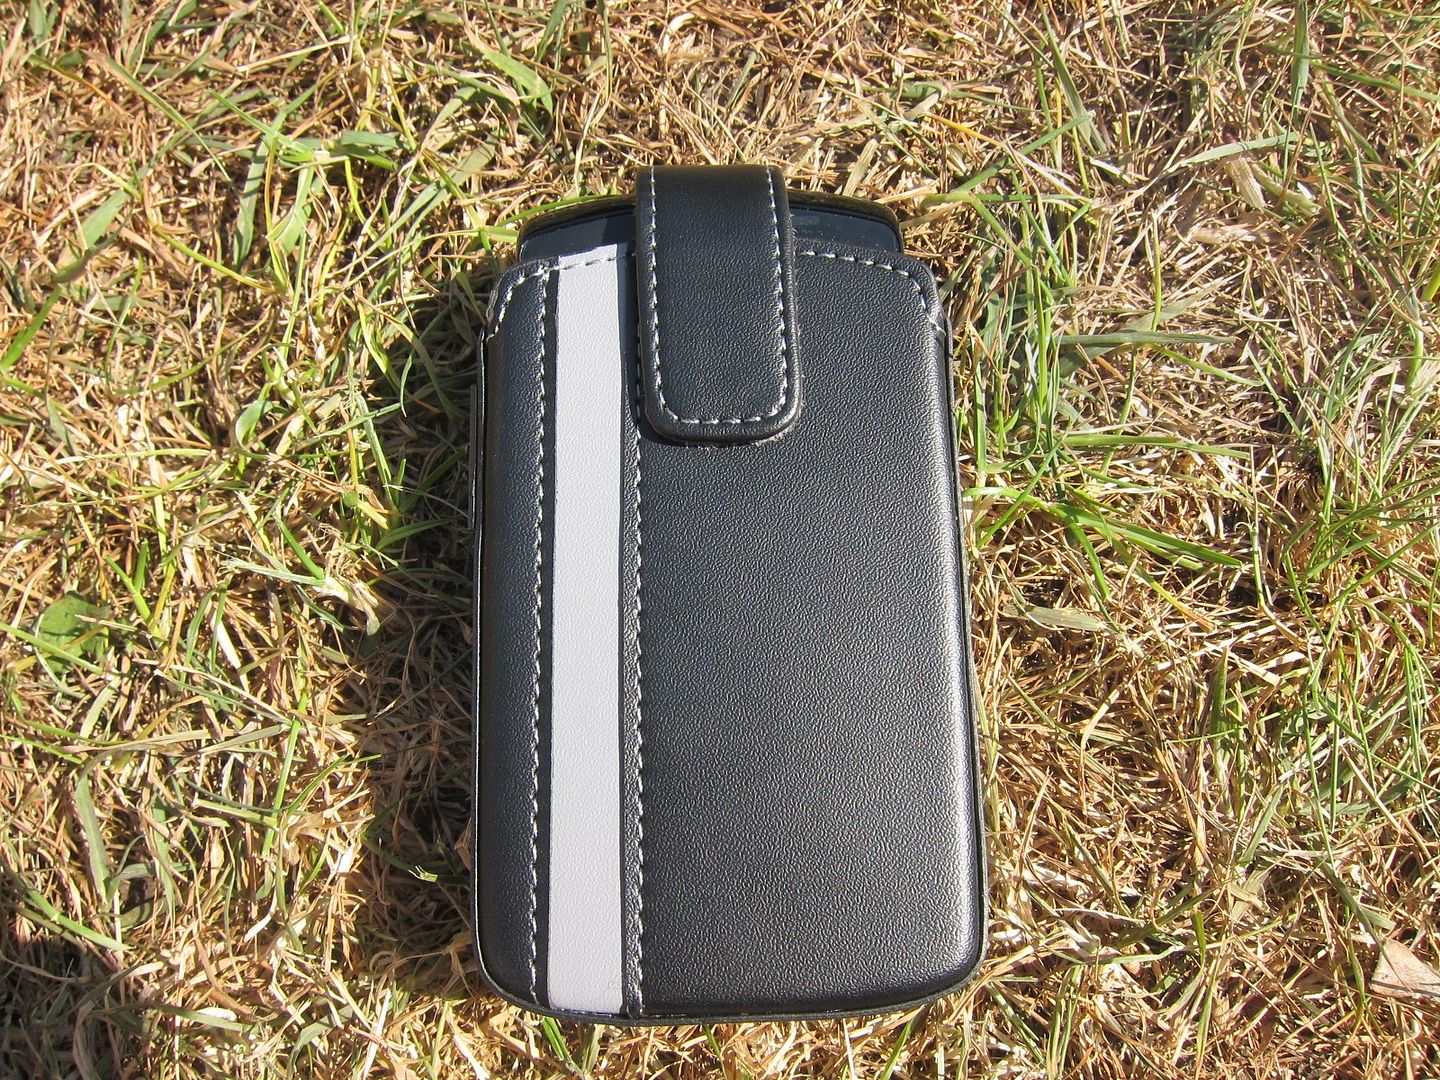 Xperia PLAY SMA 7110 Pouch Case Review